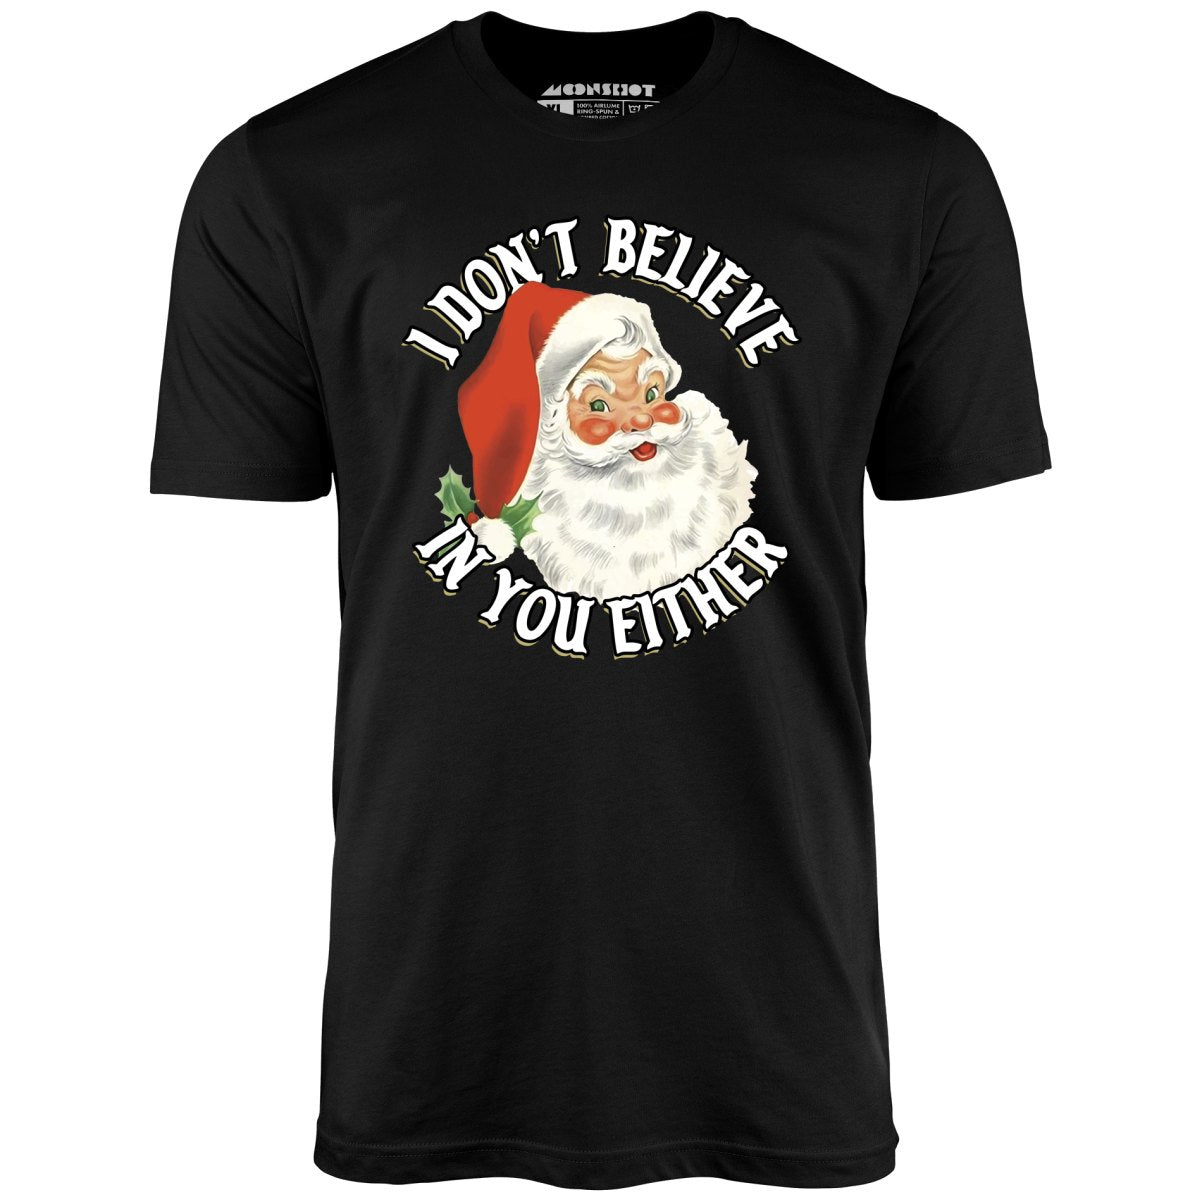 I Don't Believe in You Either - Unisex T-Shirt